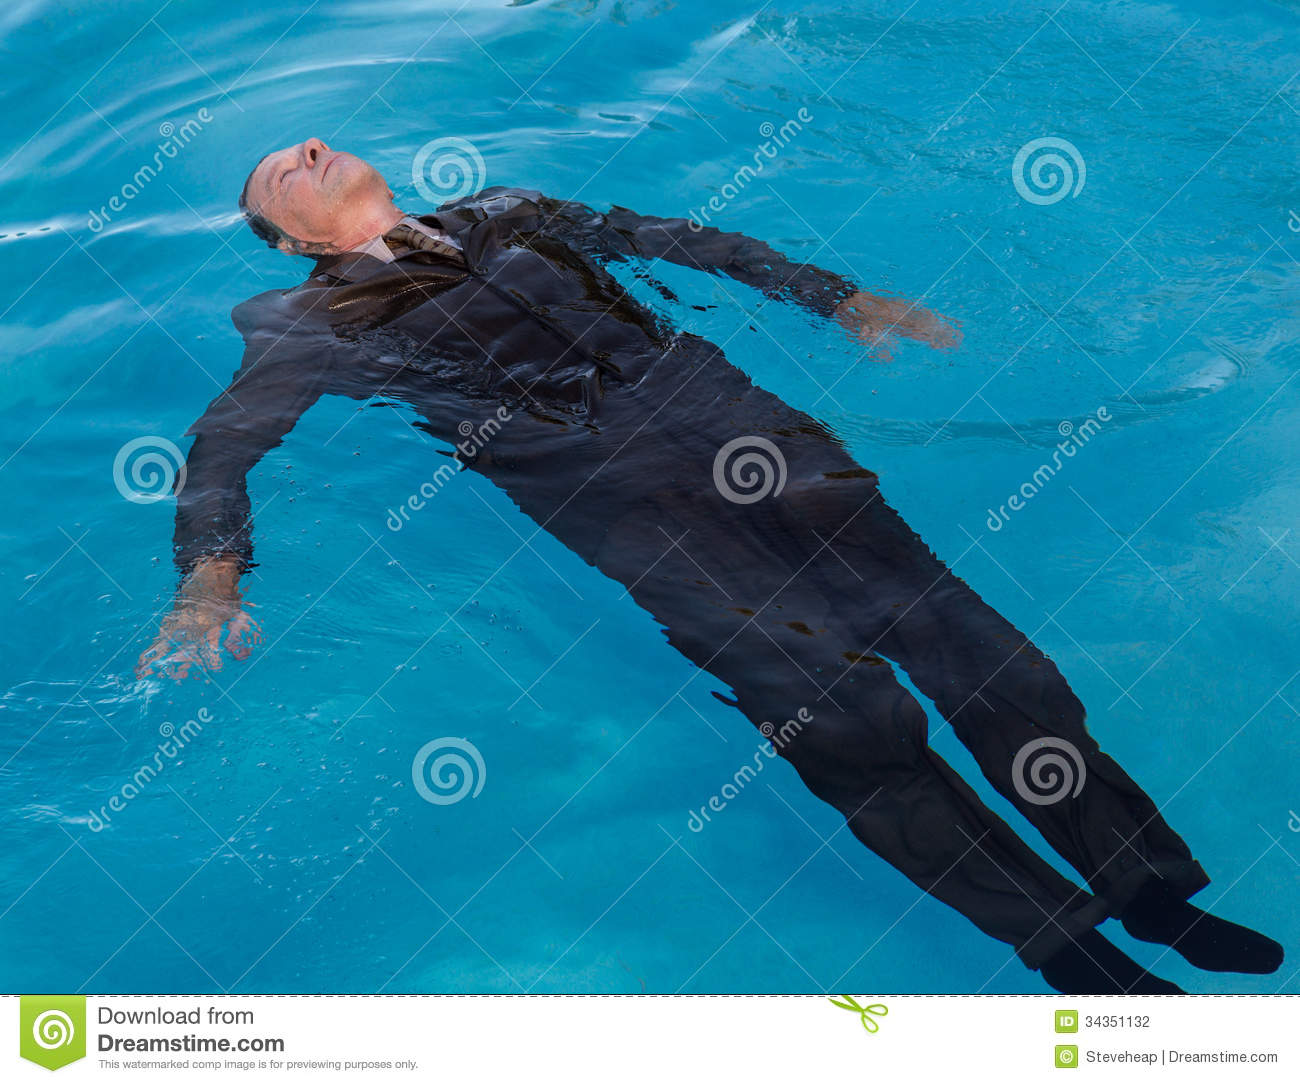 In Deep Blue Pool Looking Like Drowning As A Result Of Problems